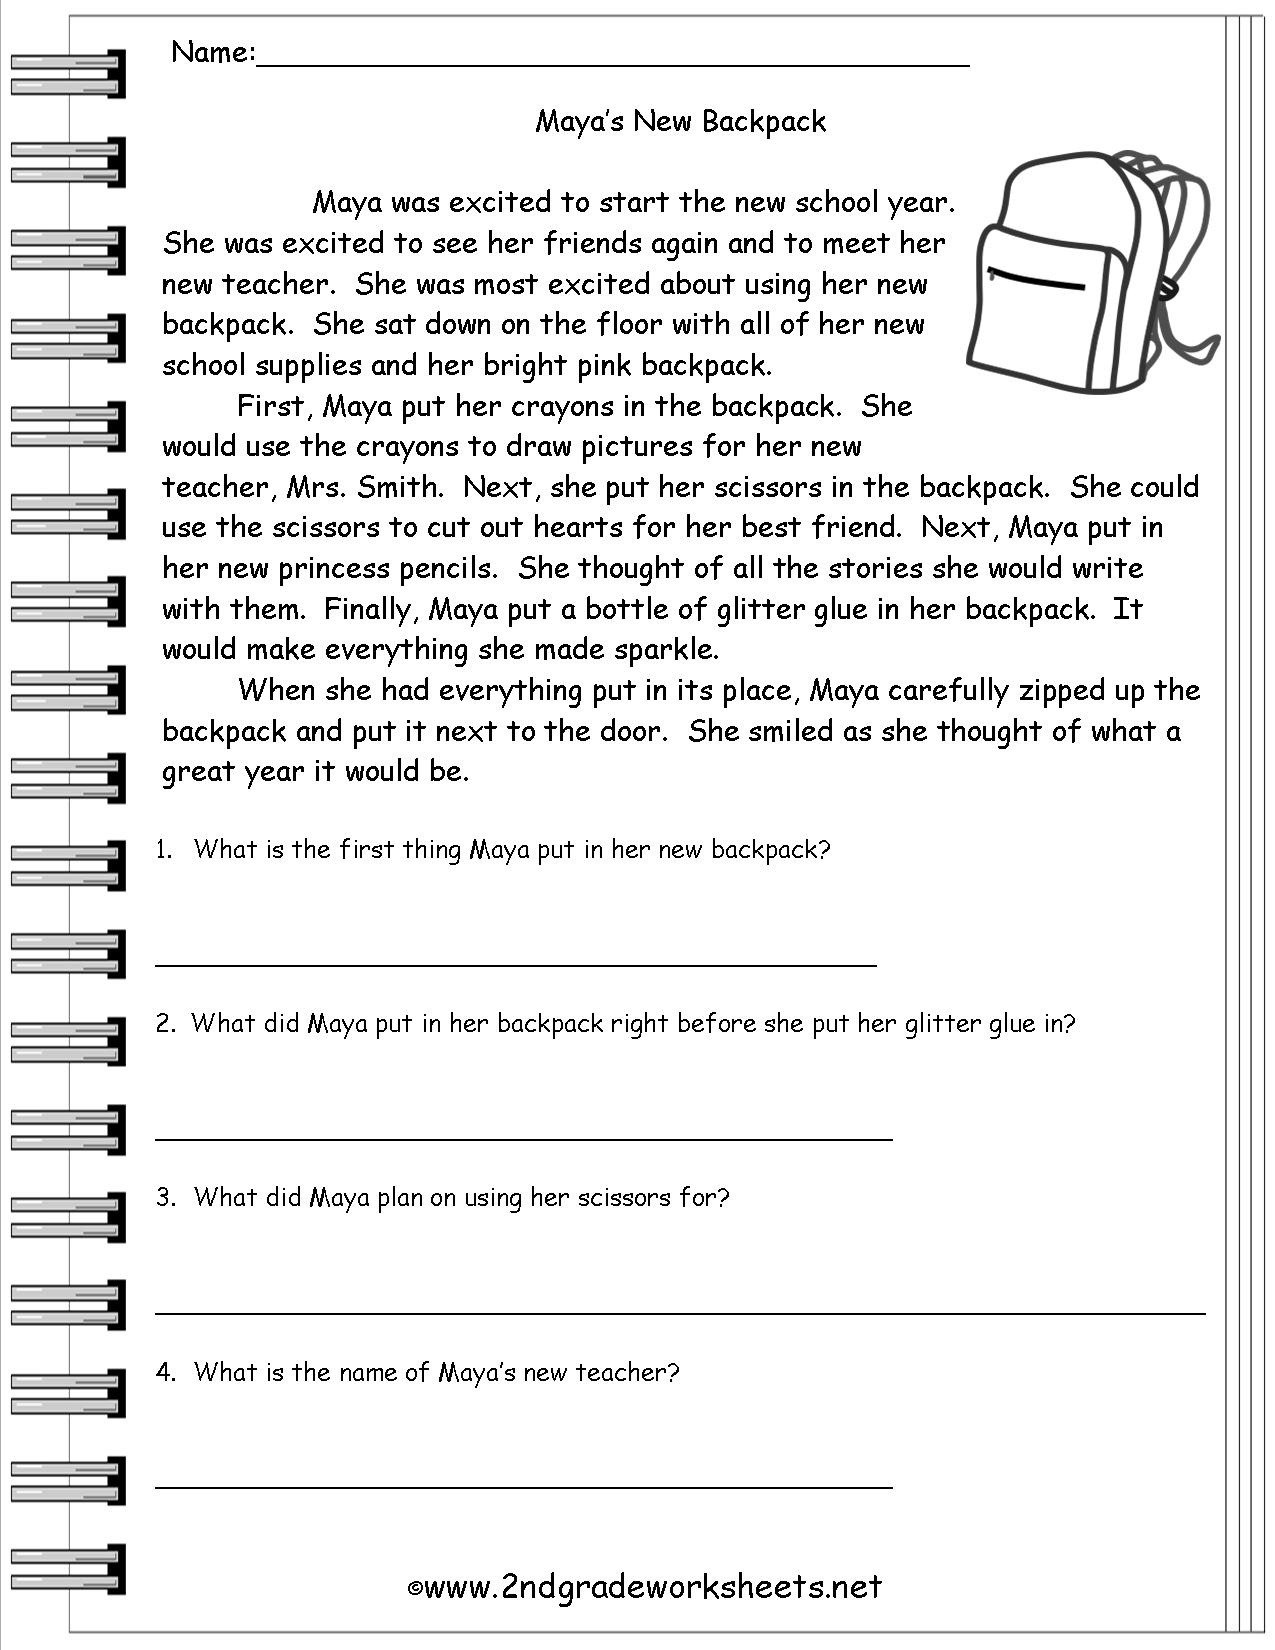 Free Printable Reading Comprehension Worksheets 3Rd Grade To Print | Printable Comprehension Worksheets For Grade 3